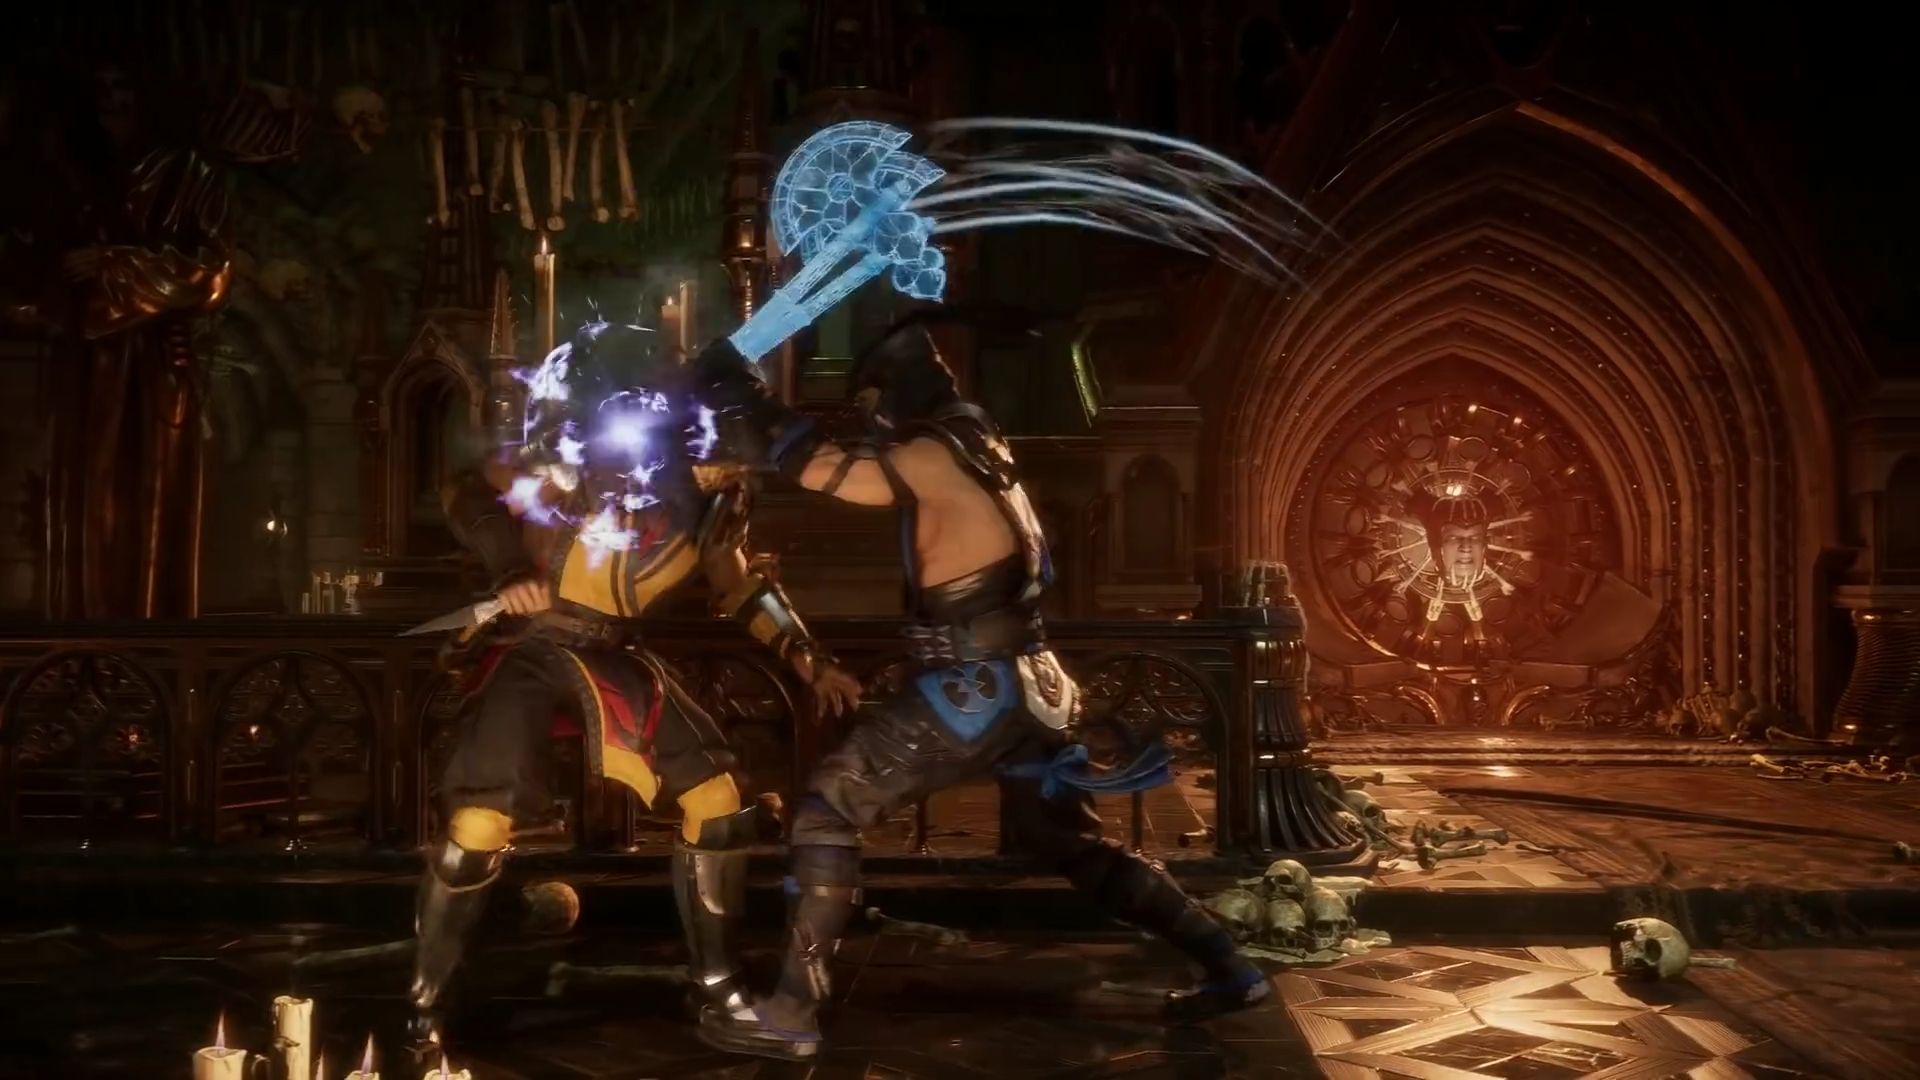 Shinnok's head is part of a stage